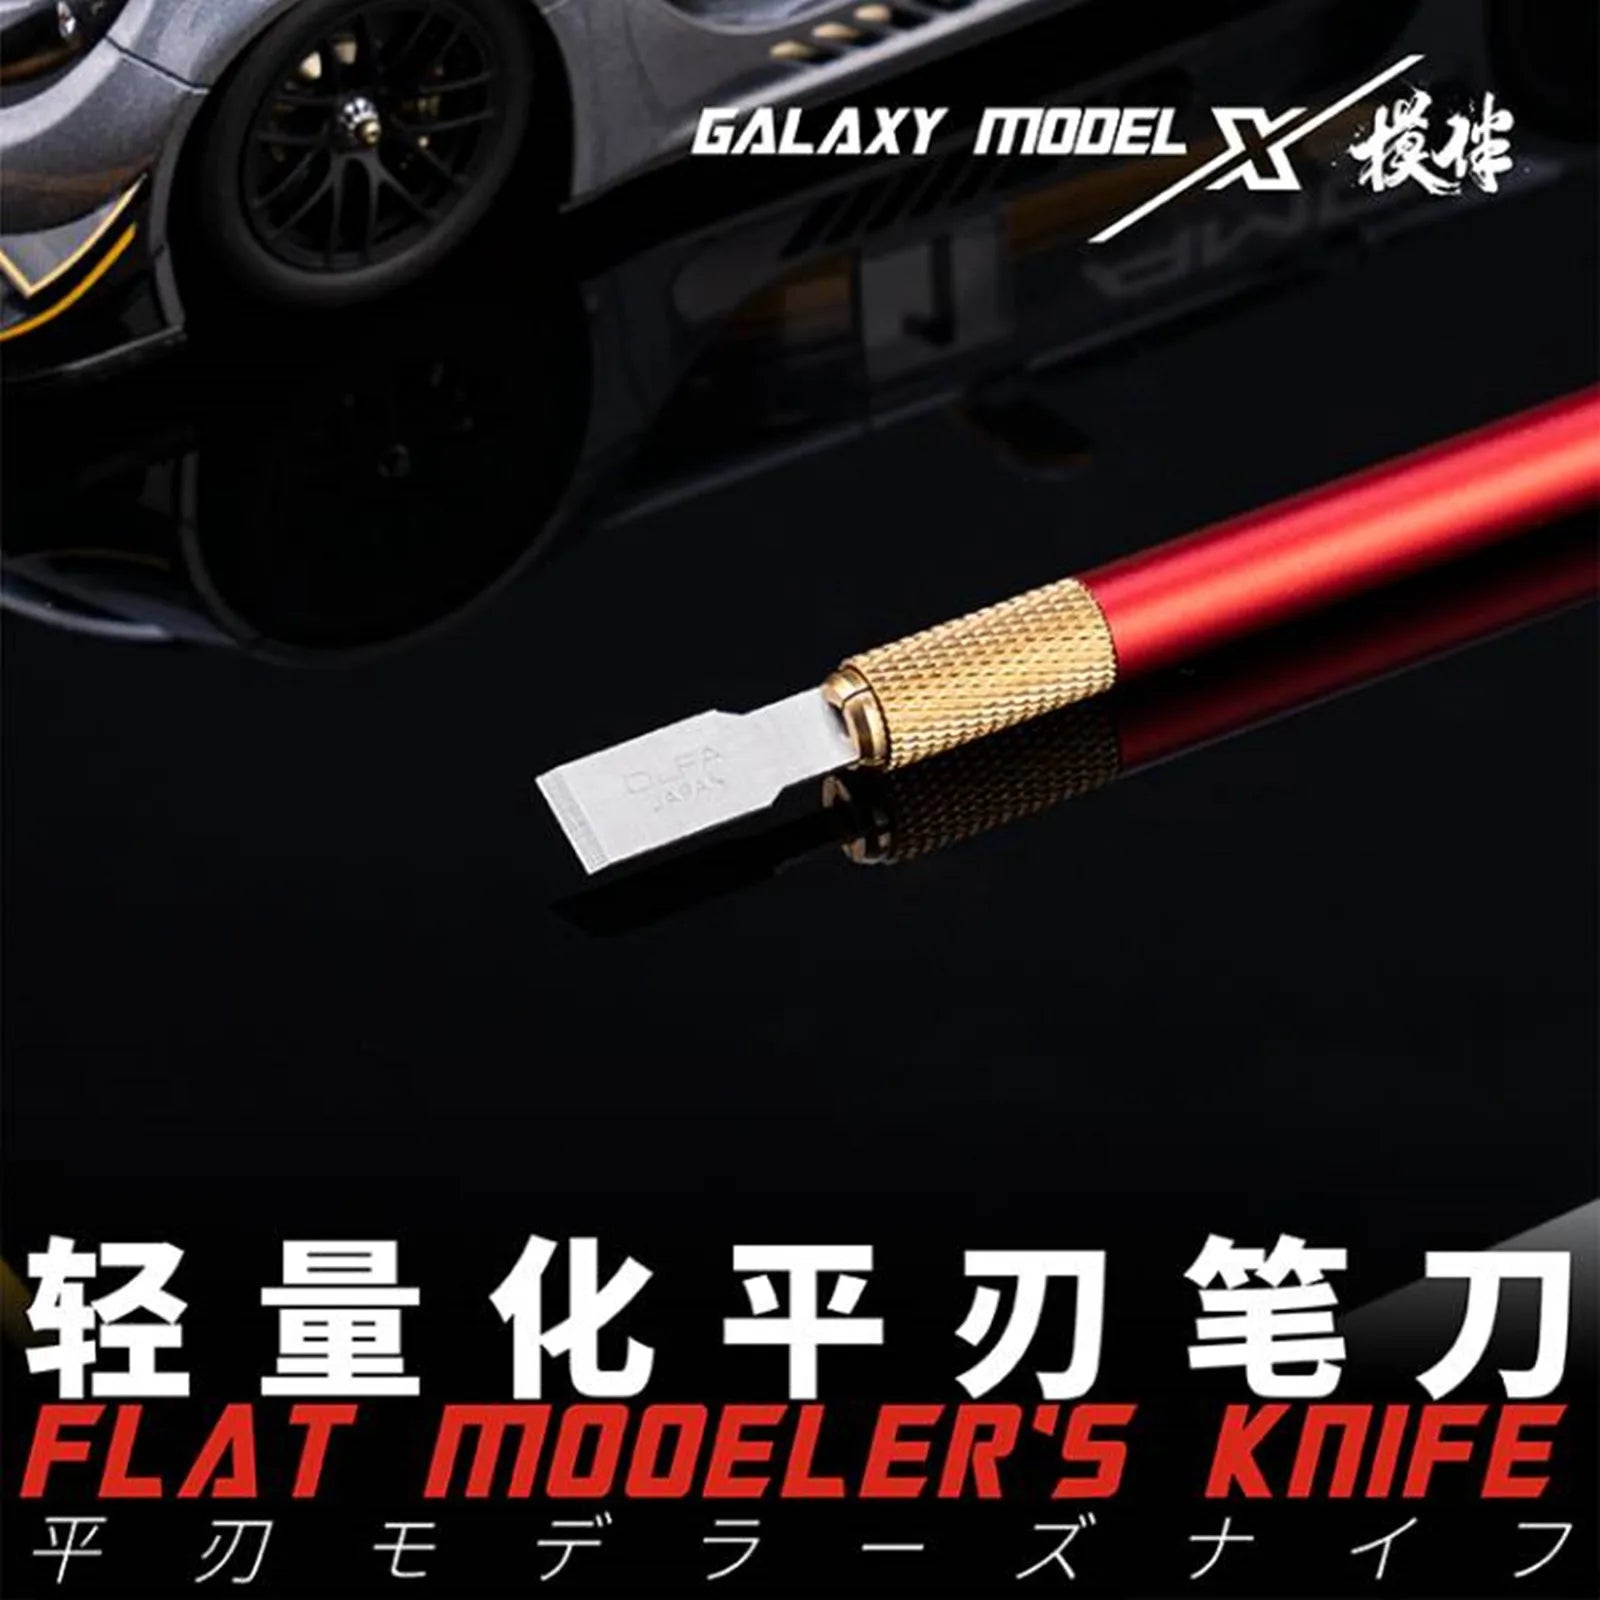 GALAXY Tool Flat Modeler's Knife for Precision Assembly in Model Building